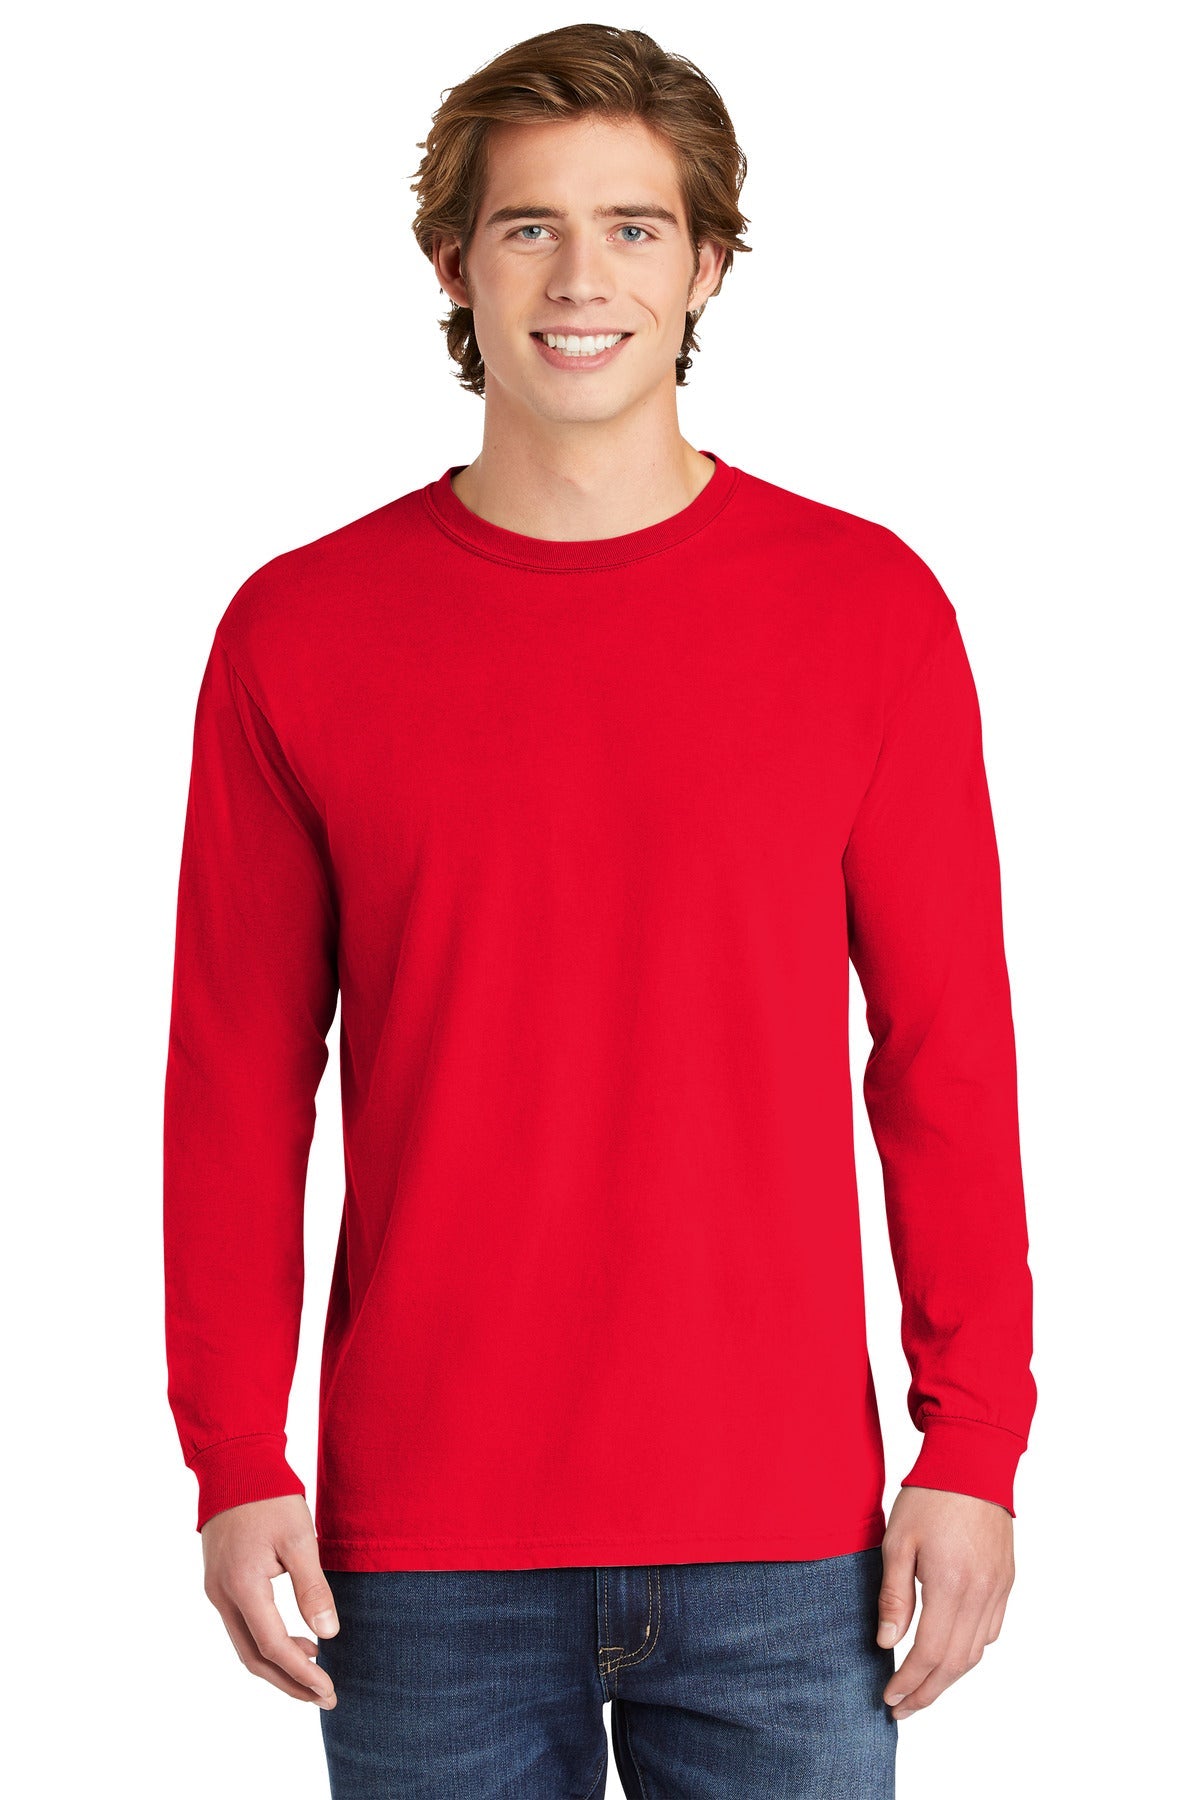 COMFORT COLORS ® Heavyweight Ring Spun Long Sleeve Tee. 6014 [Red] - DFW Impression